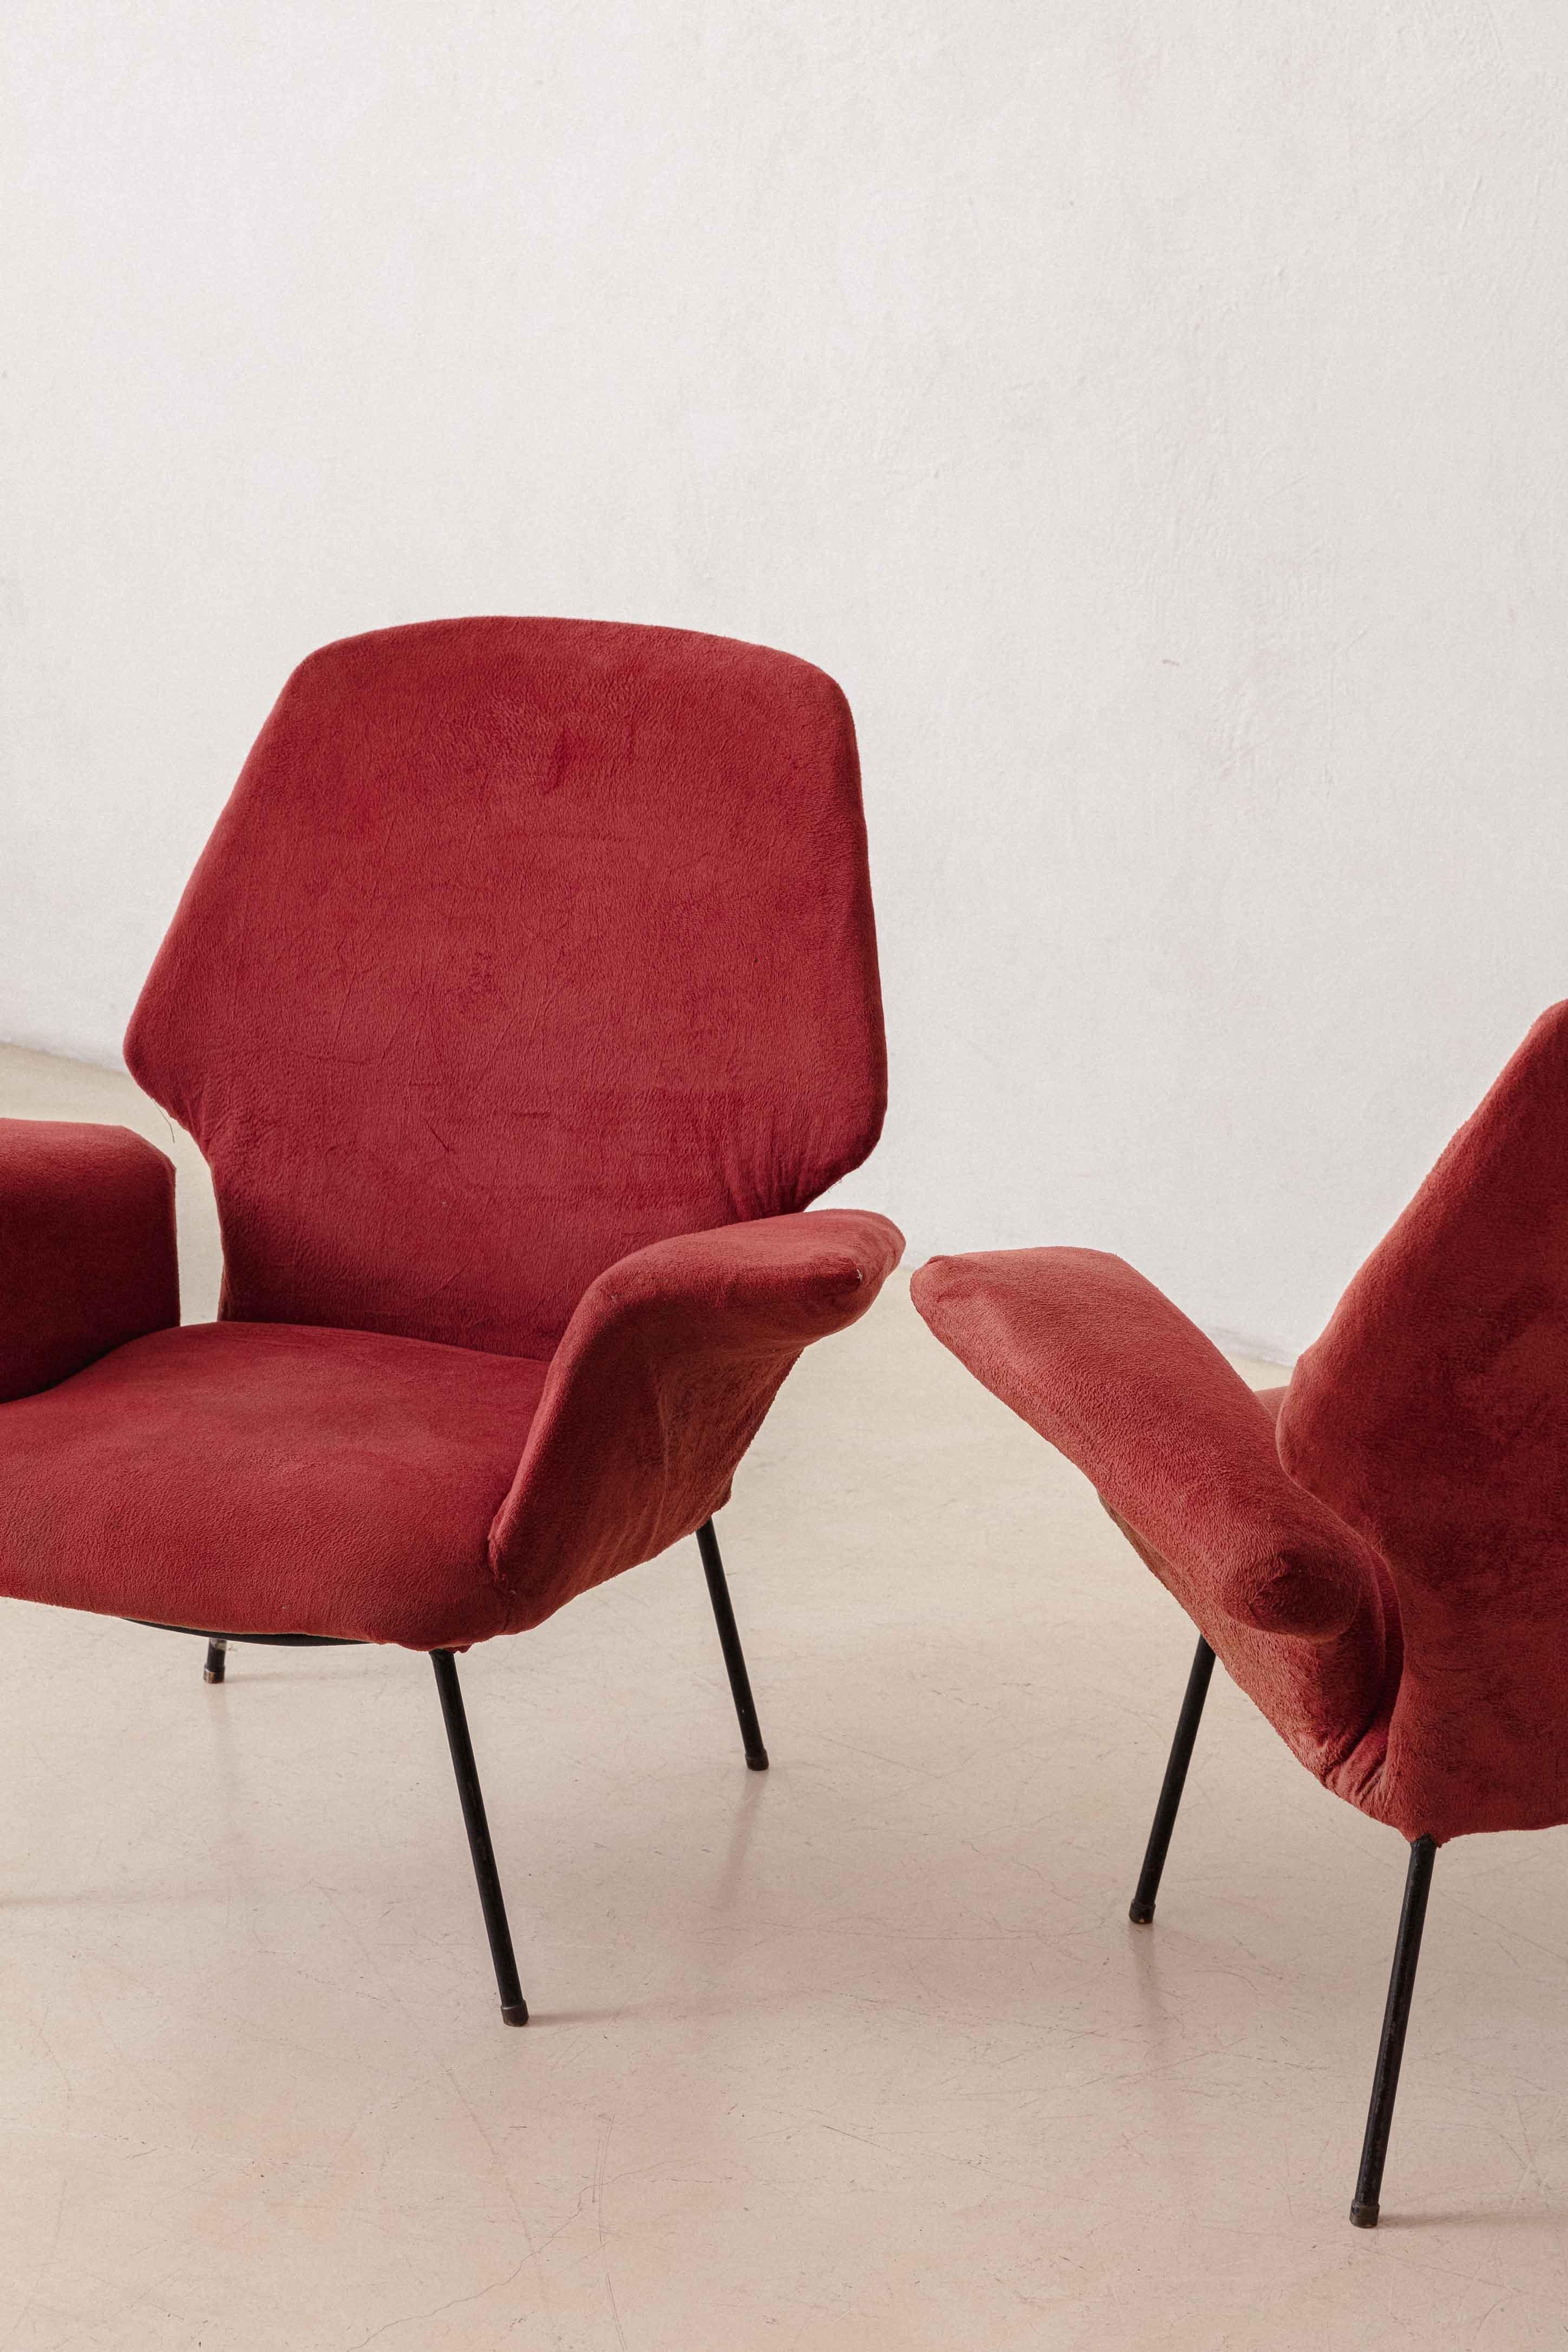 Mid-20th Century Pair of Armchairs by Carlo Hauner and Martin Eisler, Brazilian Midcentury, 1955 For Sale